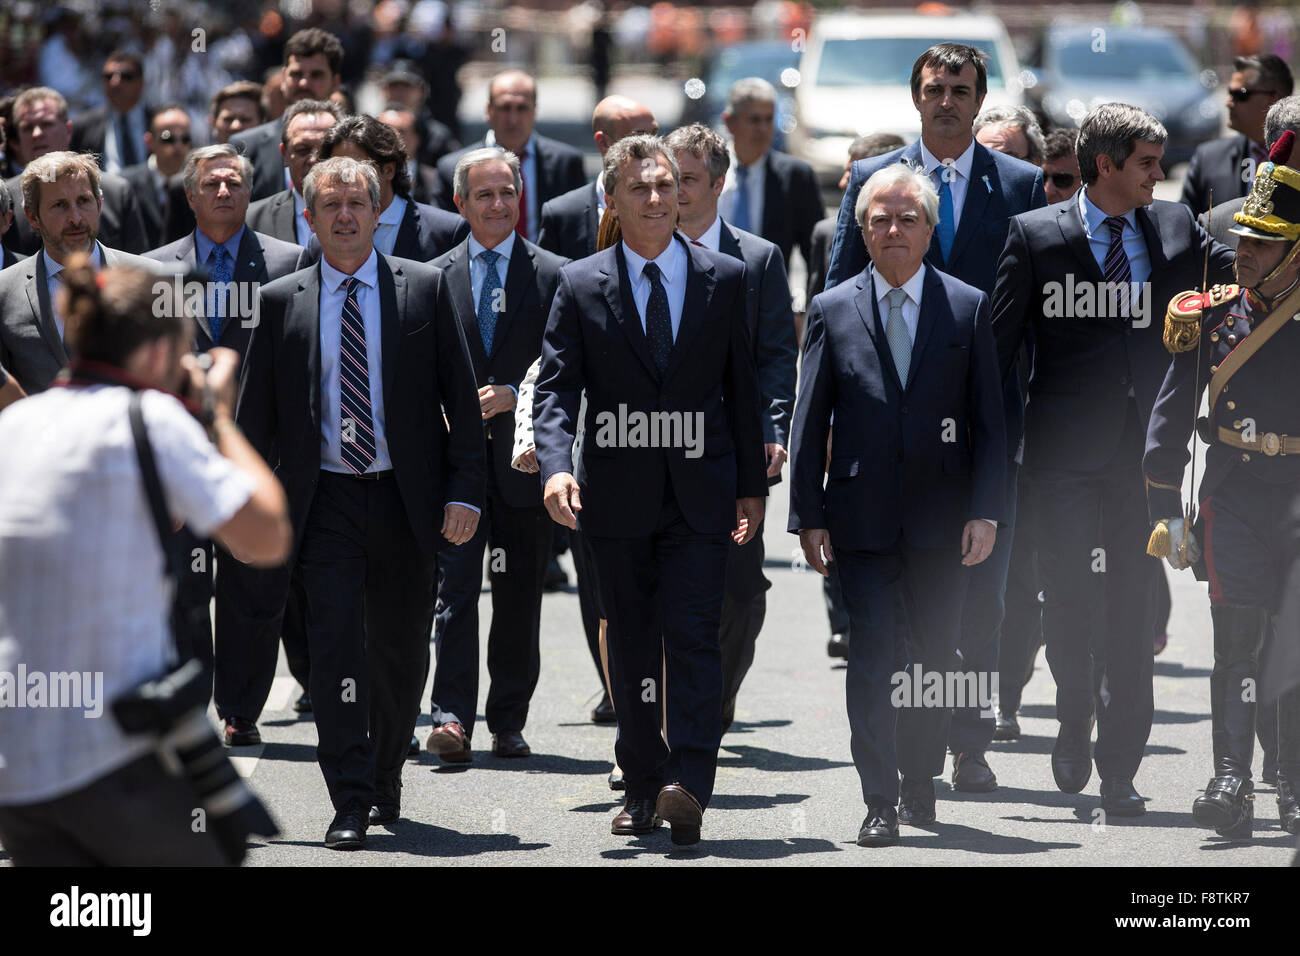 Buenos Aires, Argentina. 11th Dec, 2015. Argentina's President Mauricio Macri (C) walks on May Avenue with his Cabinet to participate in the Tedeum at the Metropolitan Cathedral in Buenos Aires, capital of Argentina, Dec. 11, 2015. According to local press, Mauricio Macri Friday attended the traditional religious service at the Metropolital Cathedral, one day after his pesidential inauguration. Credit:  Martin Zabala/Xinhua/Alamy Live News Stock Photo